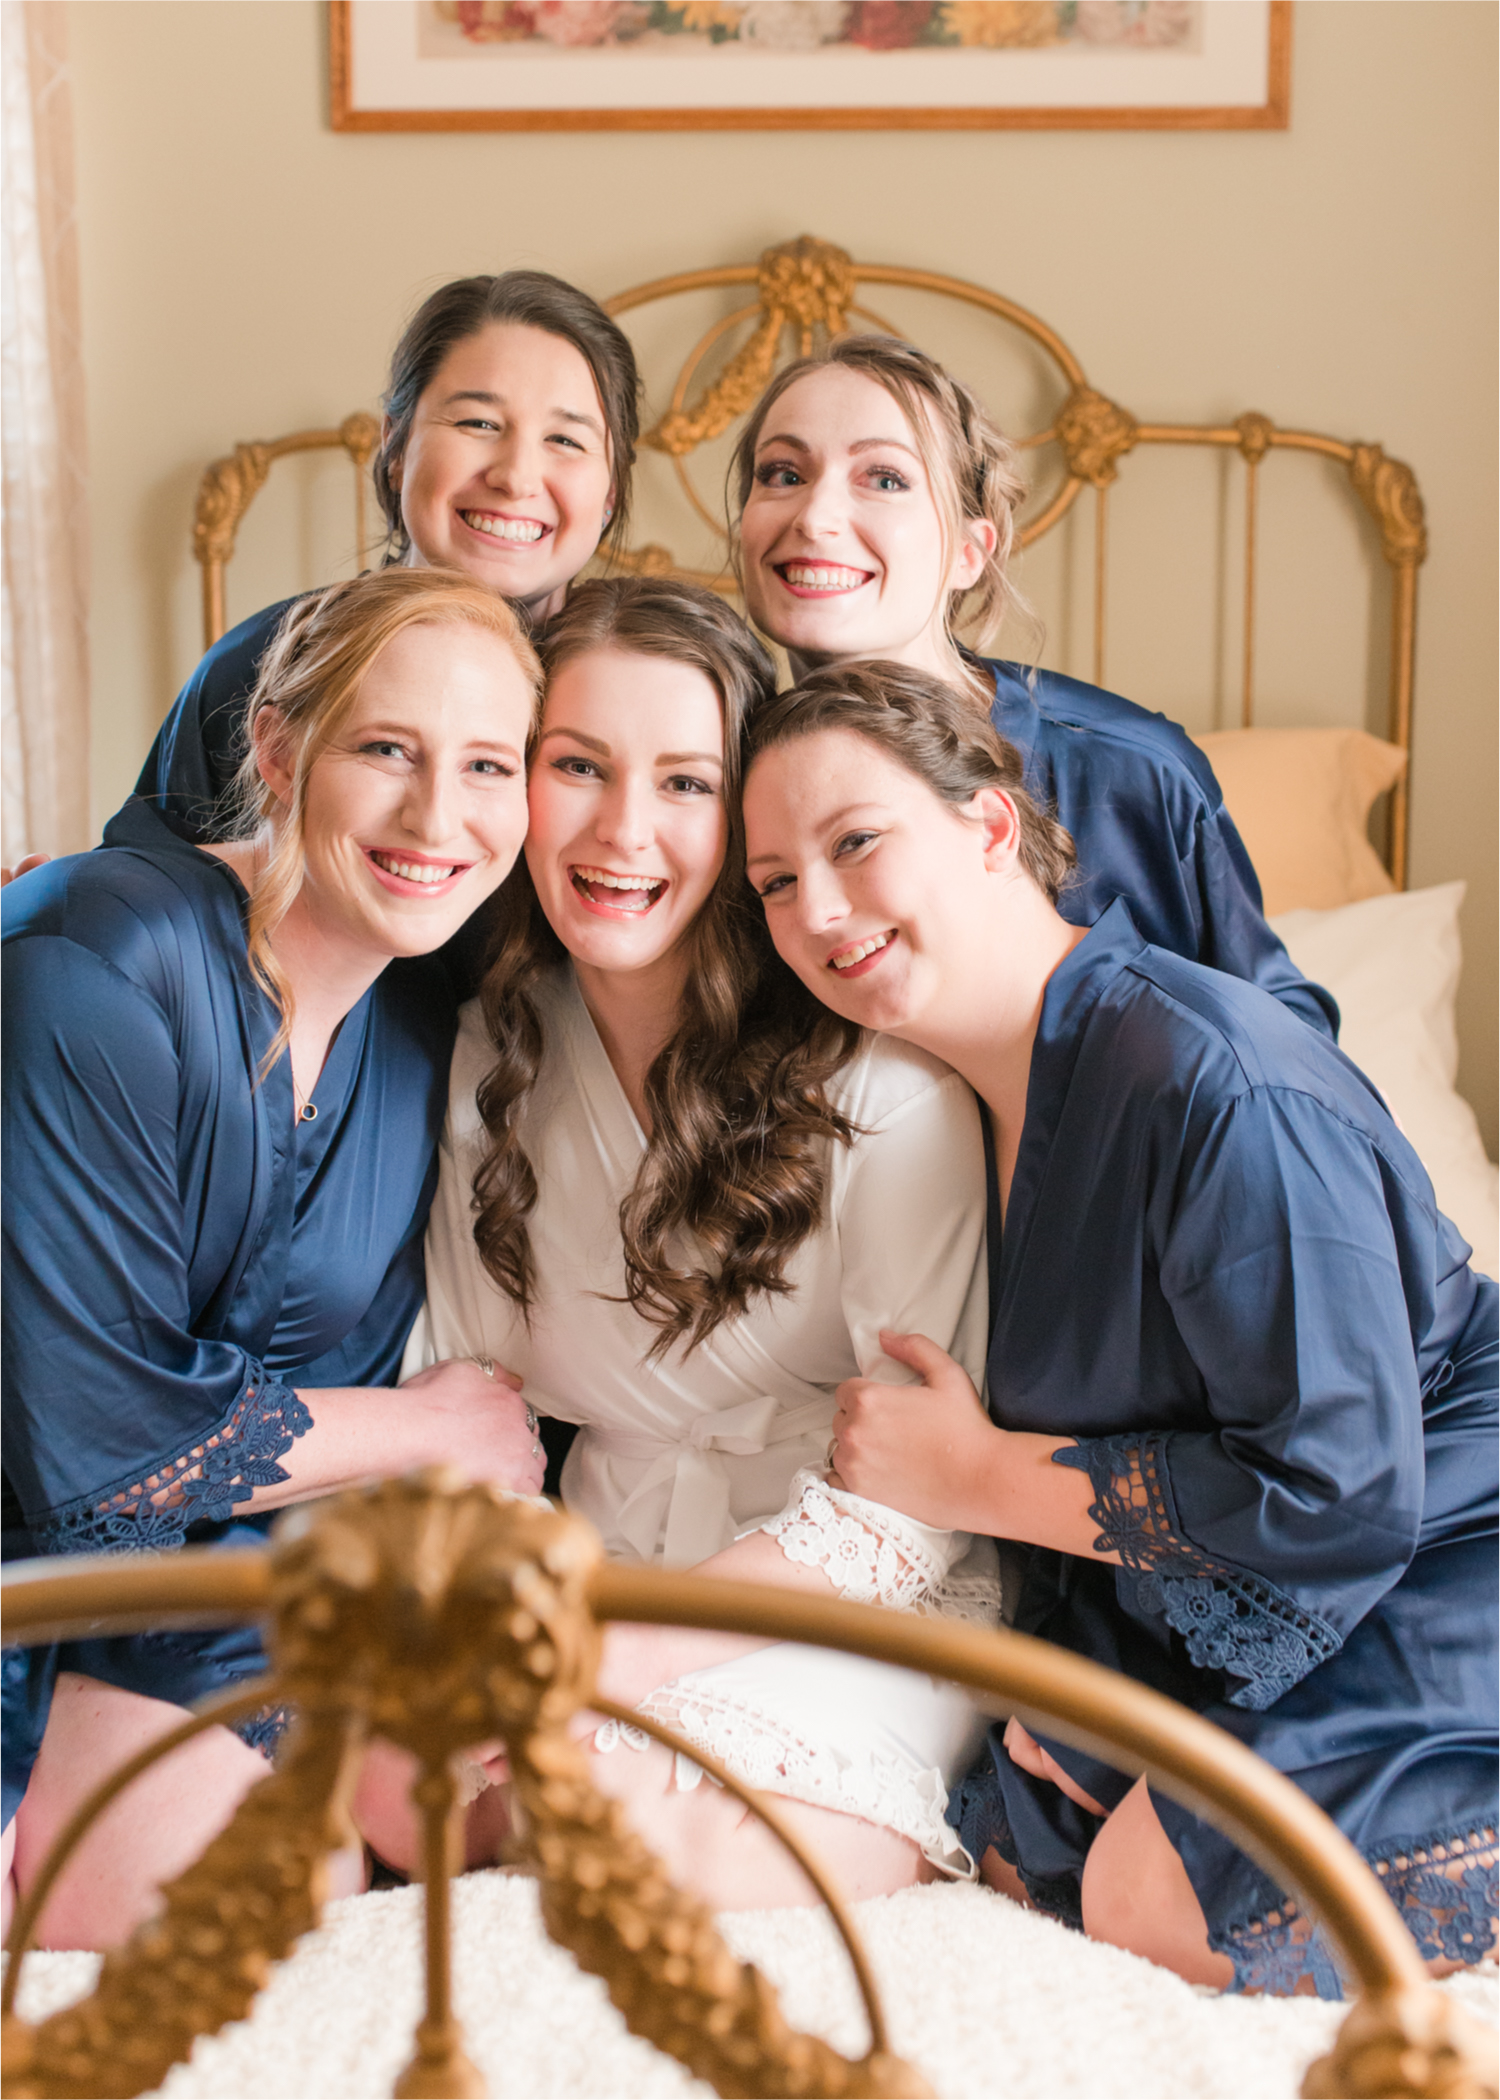 Summer Ellis Ranch Wedding in Loveland Colorado | Britni Girard Photography | Wedding Photo and Video Team | Bride hair Dondi AtWow from Sola Salon in Loveland | Getting Ready at Air BnB | Bride and bridesmaids in dark blue robes on bed